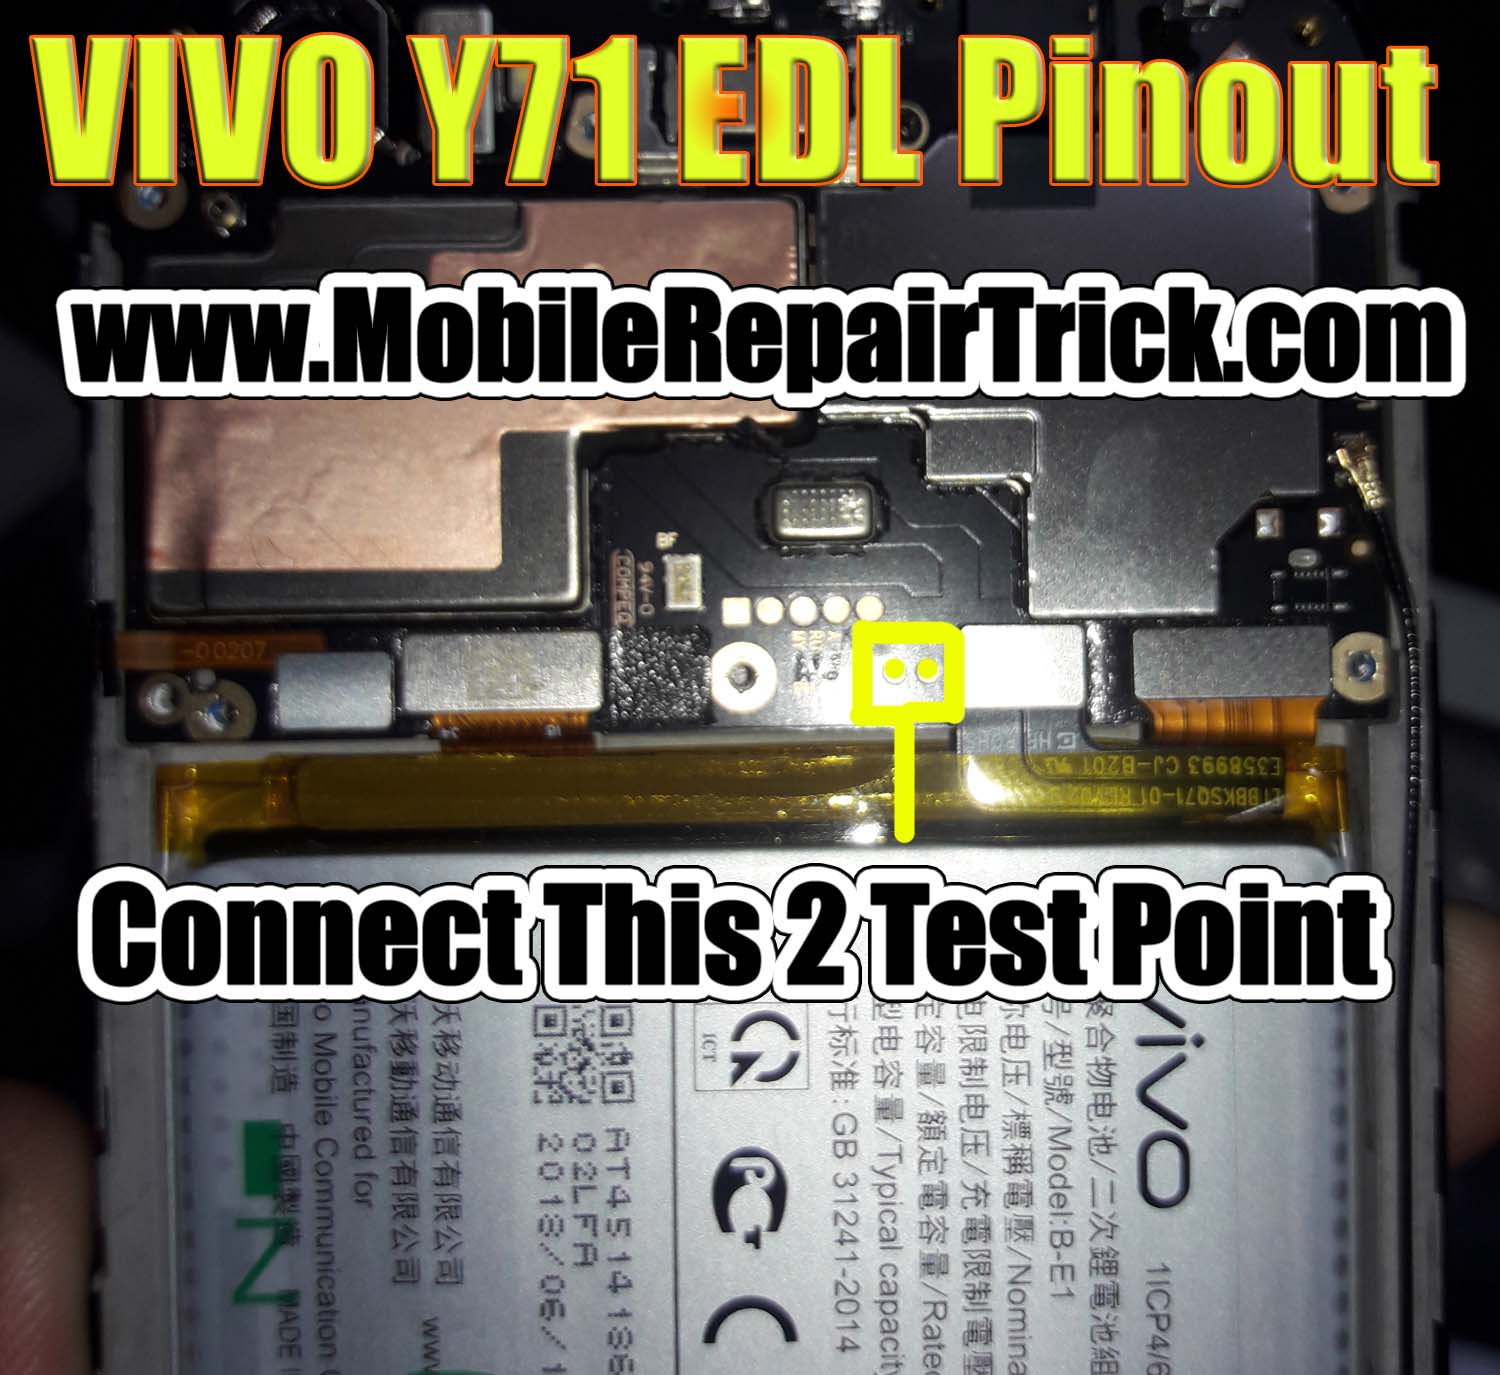 VIVO Y71 Edl Pinout |edl test point - www.GsmClinic.com